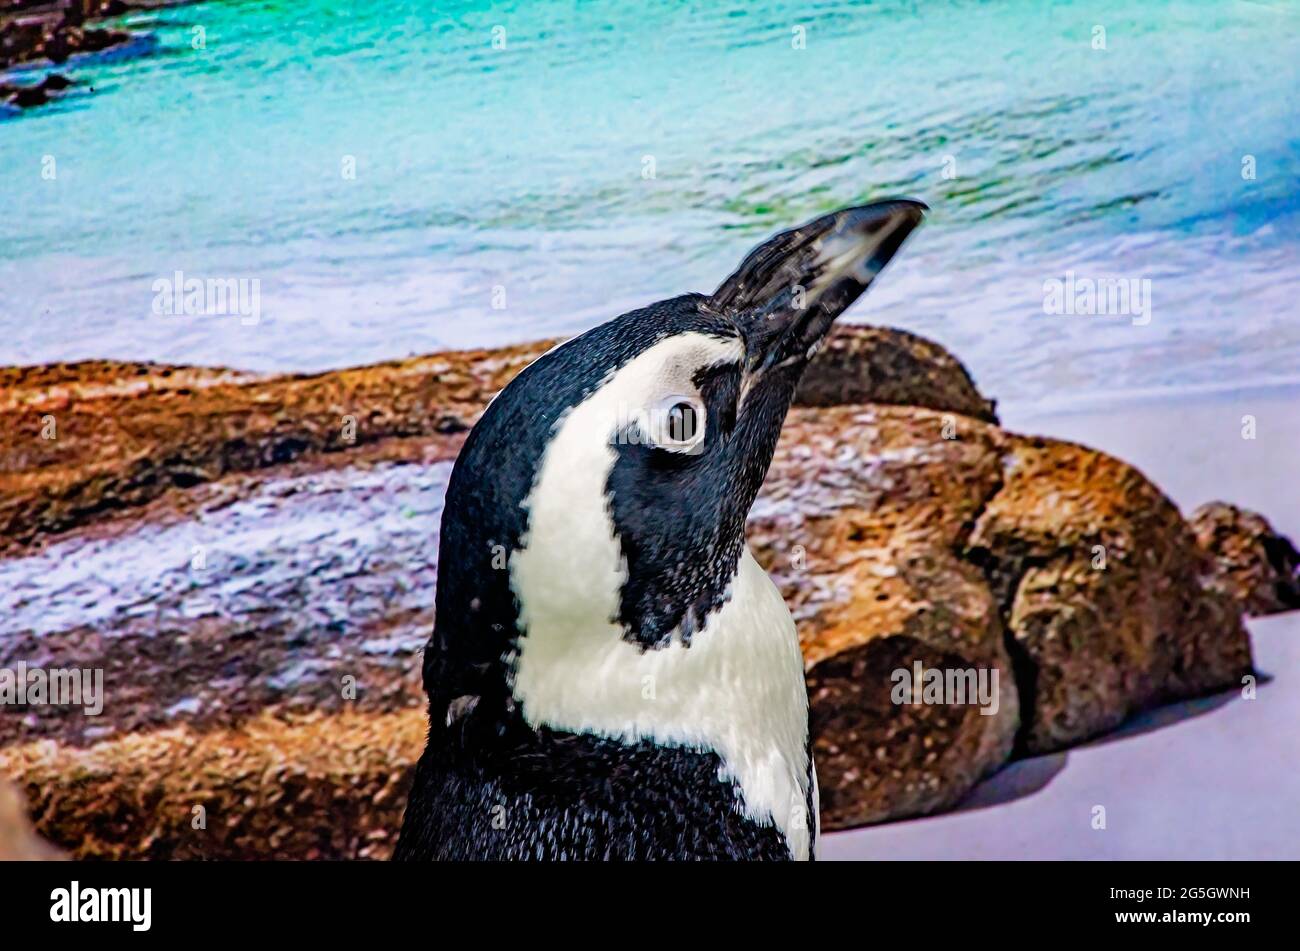 Flop, an African penguin, is pictured at Mississippi Aquarium, June 24, 2021, in Gulfport, Mississippi. Stock Photo